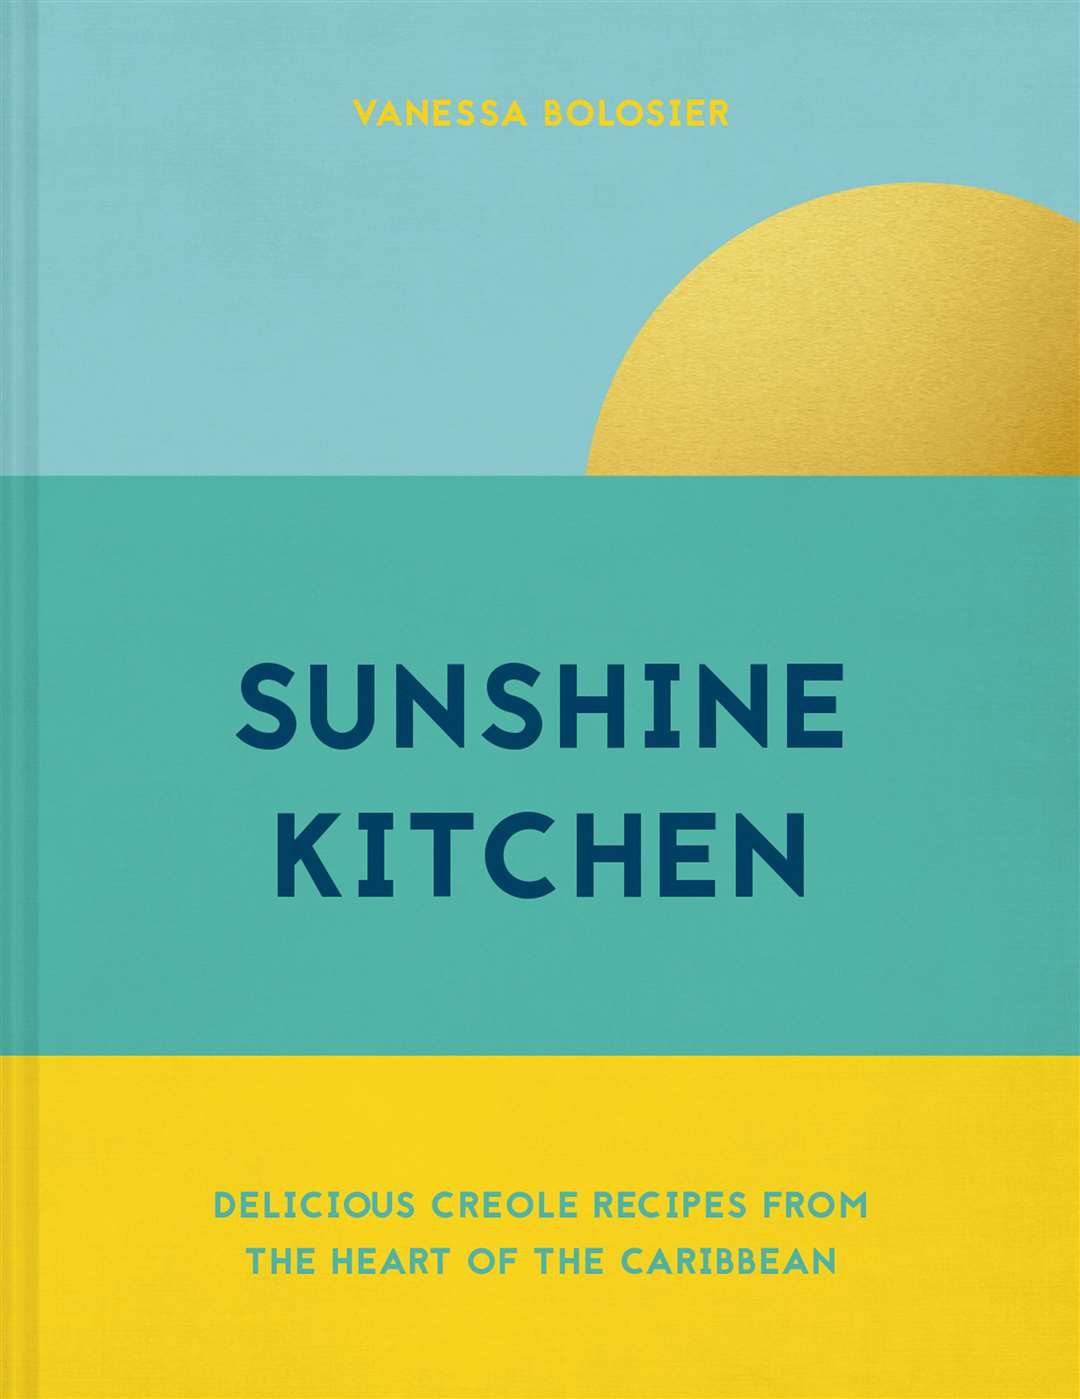 Sunshine Kitchen: Delicious Creole recipes from the heart of the Caribbean by Vanessa Bolosier, published by Pavilion Books. Picture: Clare Winfield/PA